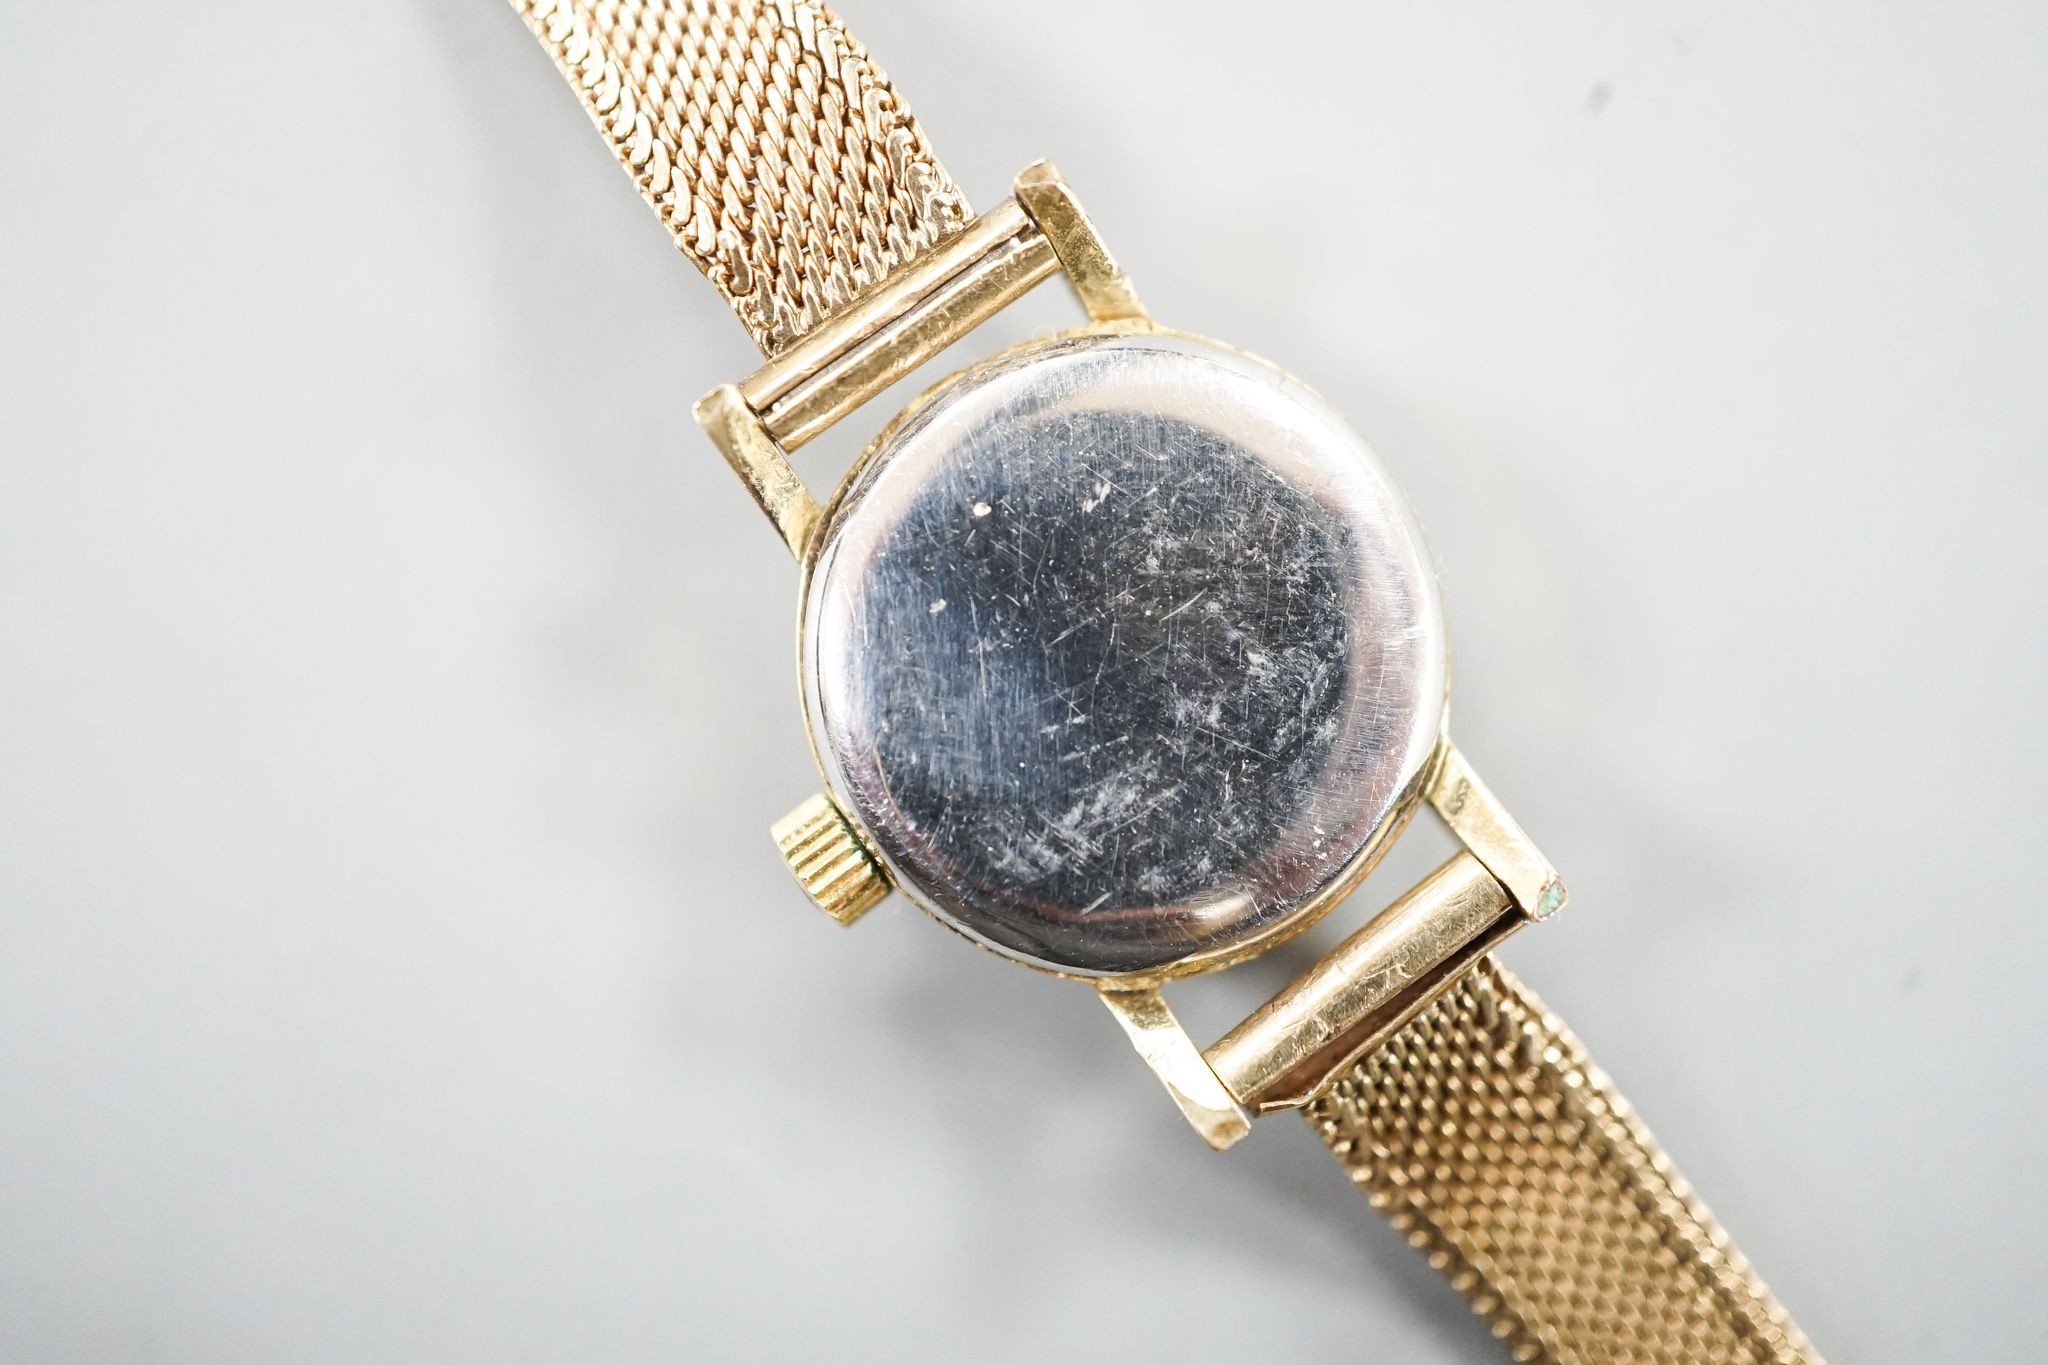 A lady's 1960's steel and gold plated Omega manual wind wrist watch, on an associated 9ct gold bracelet